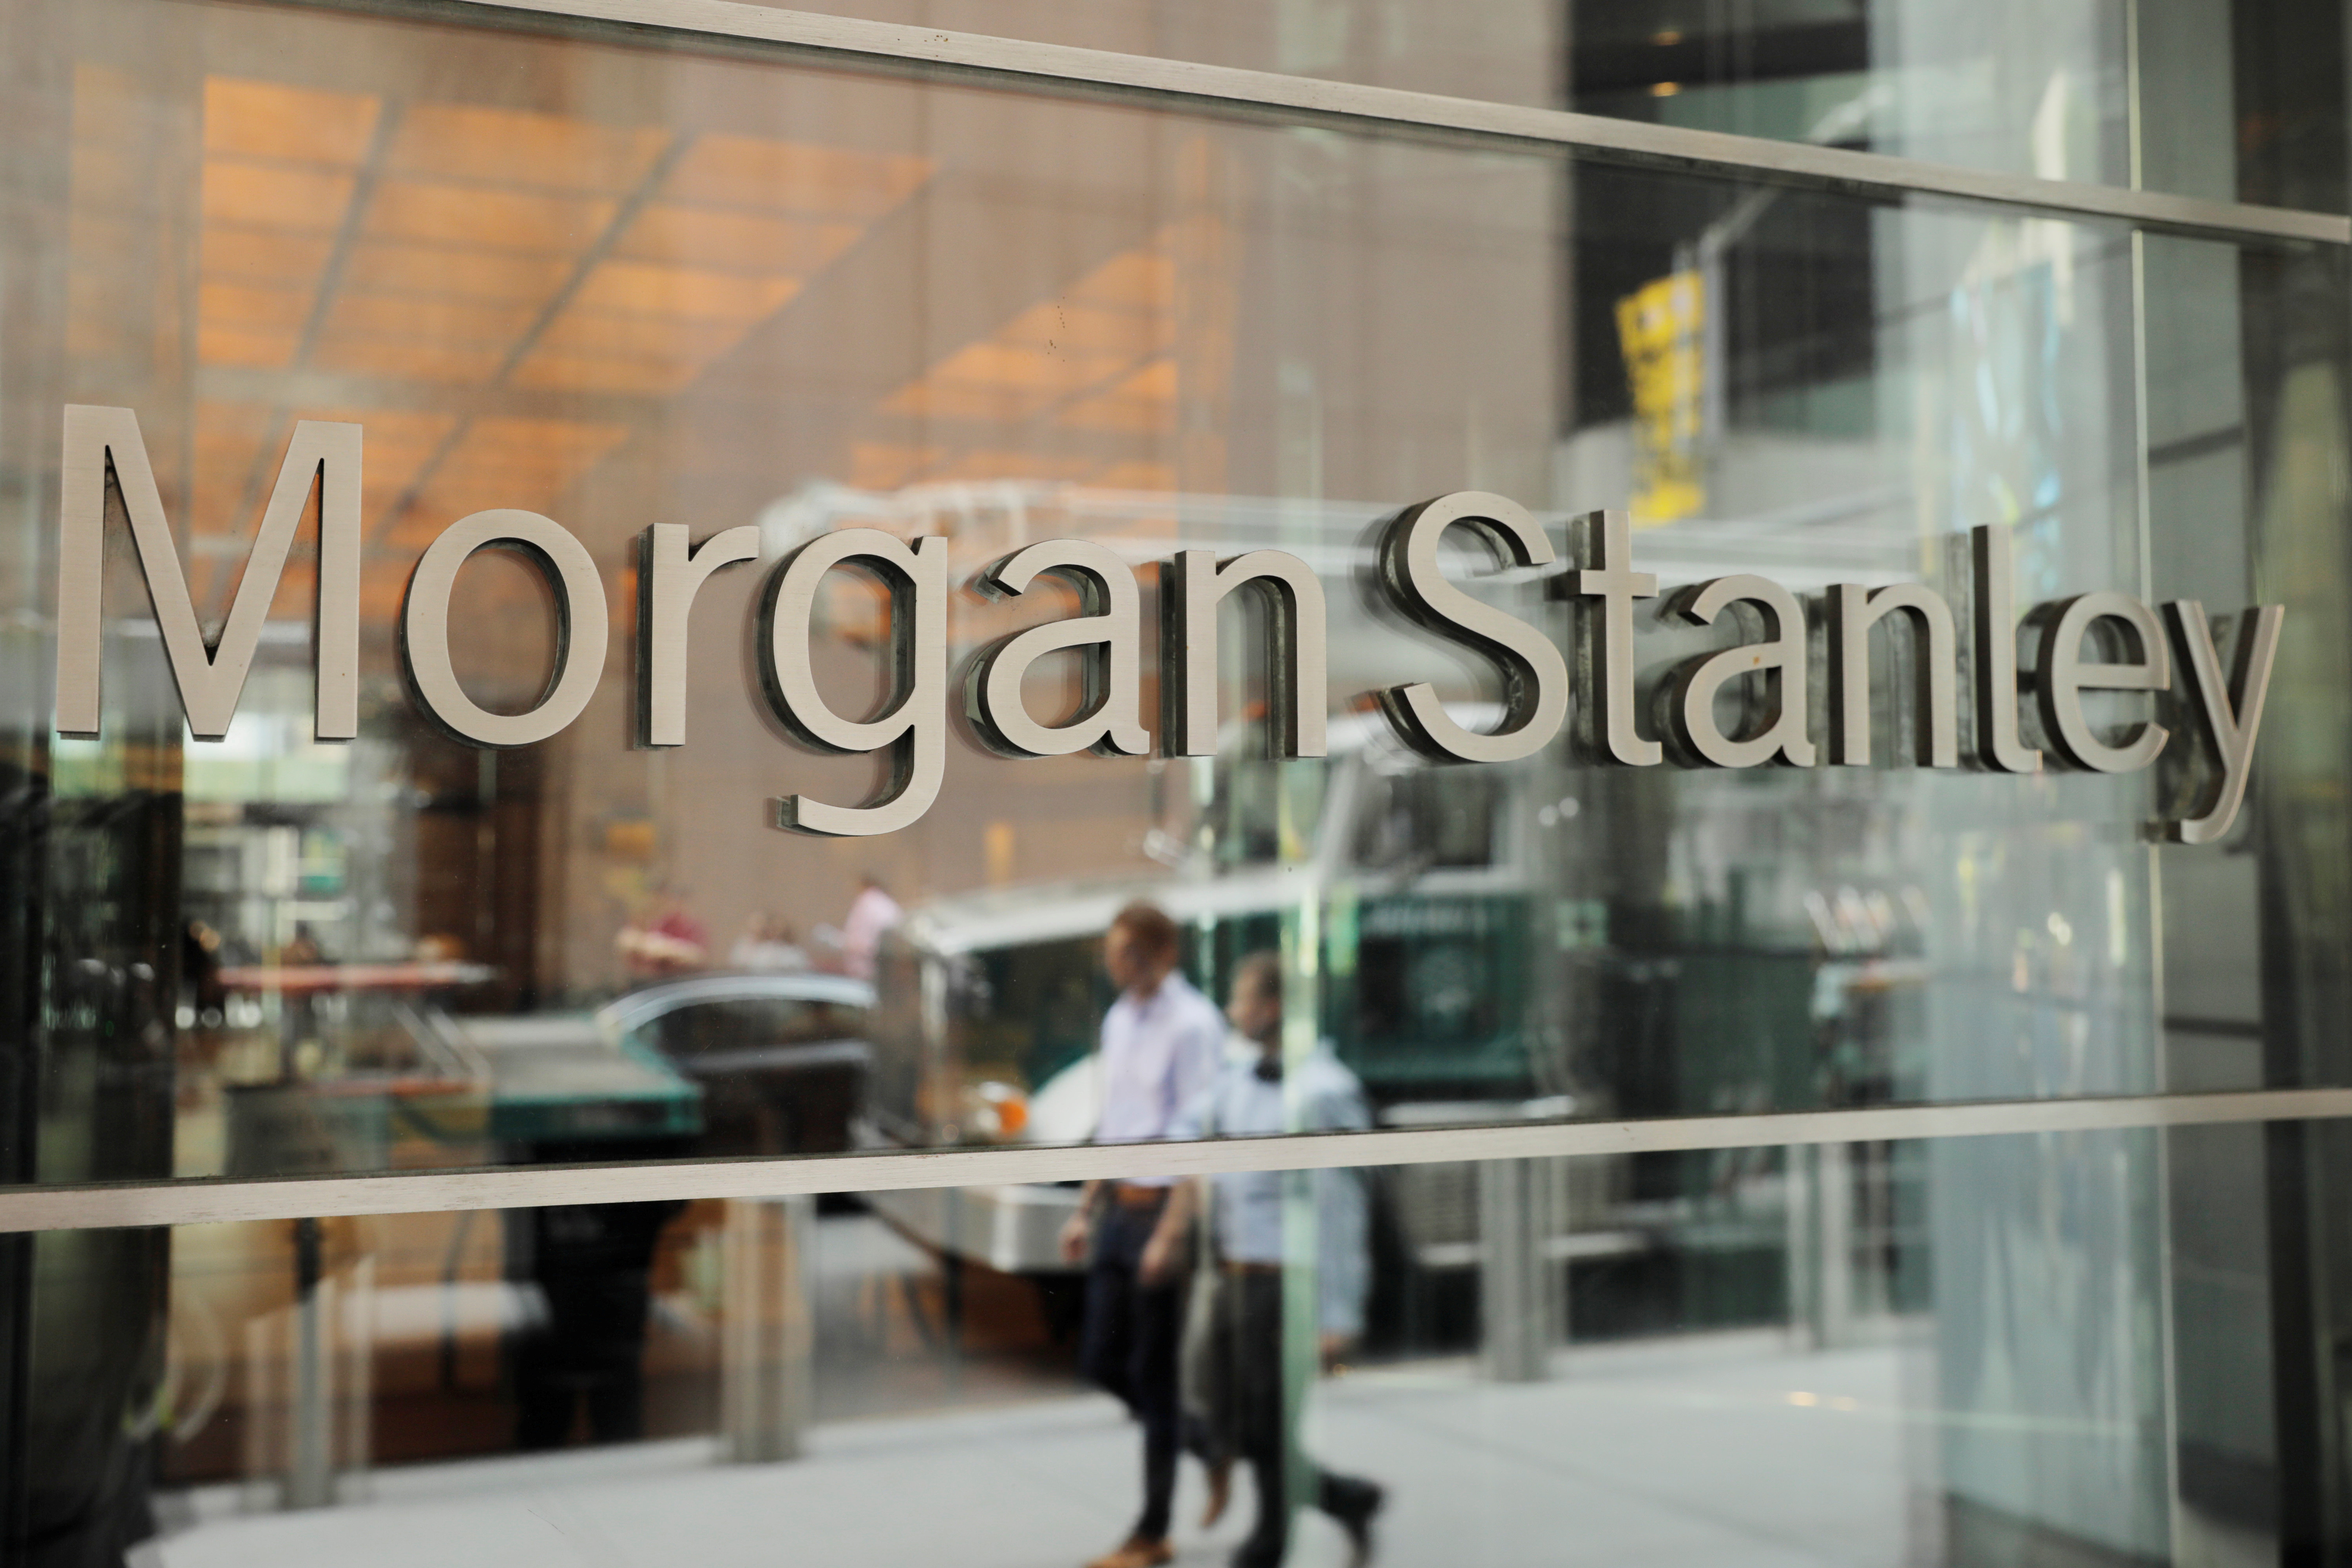 A sign is displayed on the Morgan Stanley building in New York